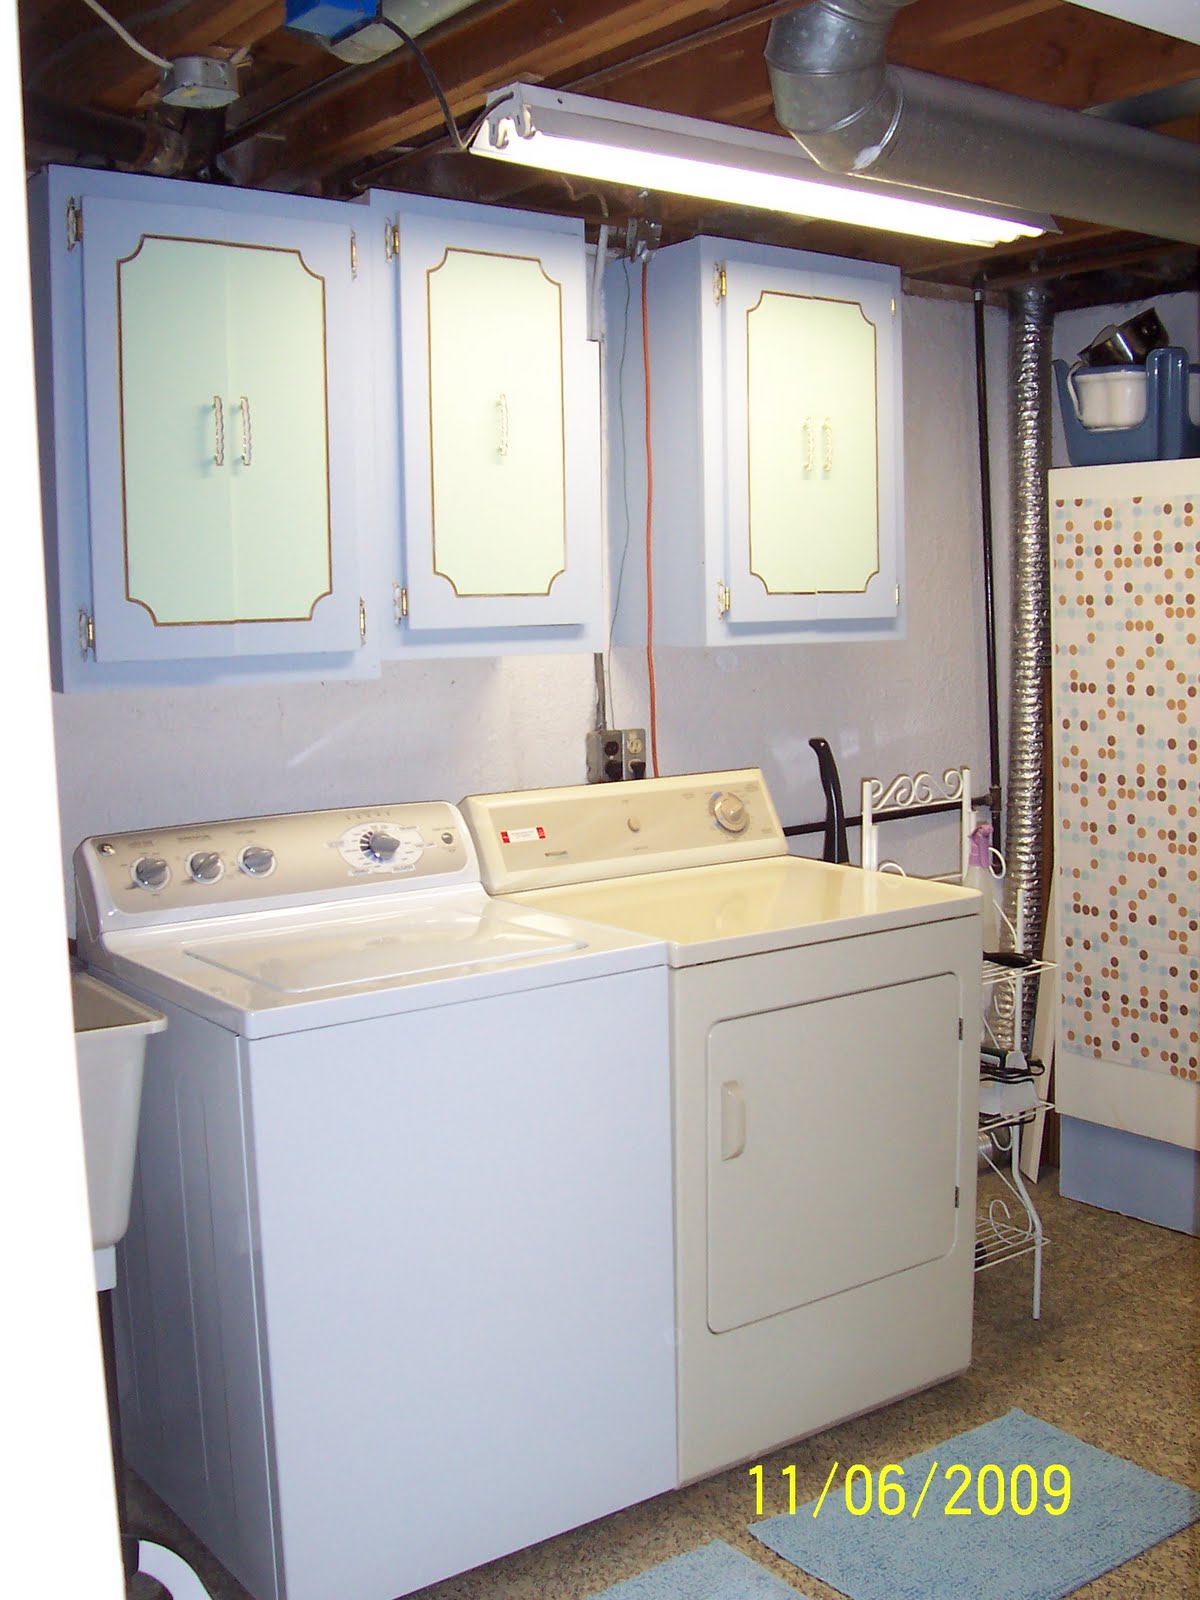 [laundry+room+finished+pic+larger.jpg]